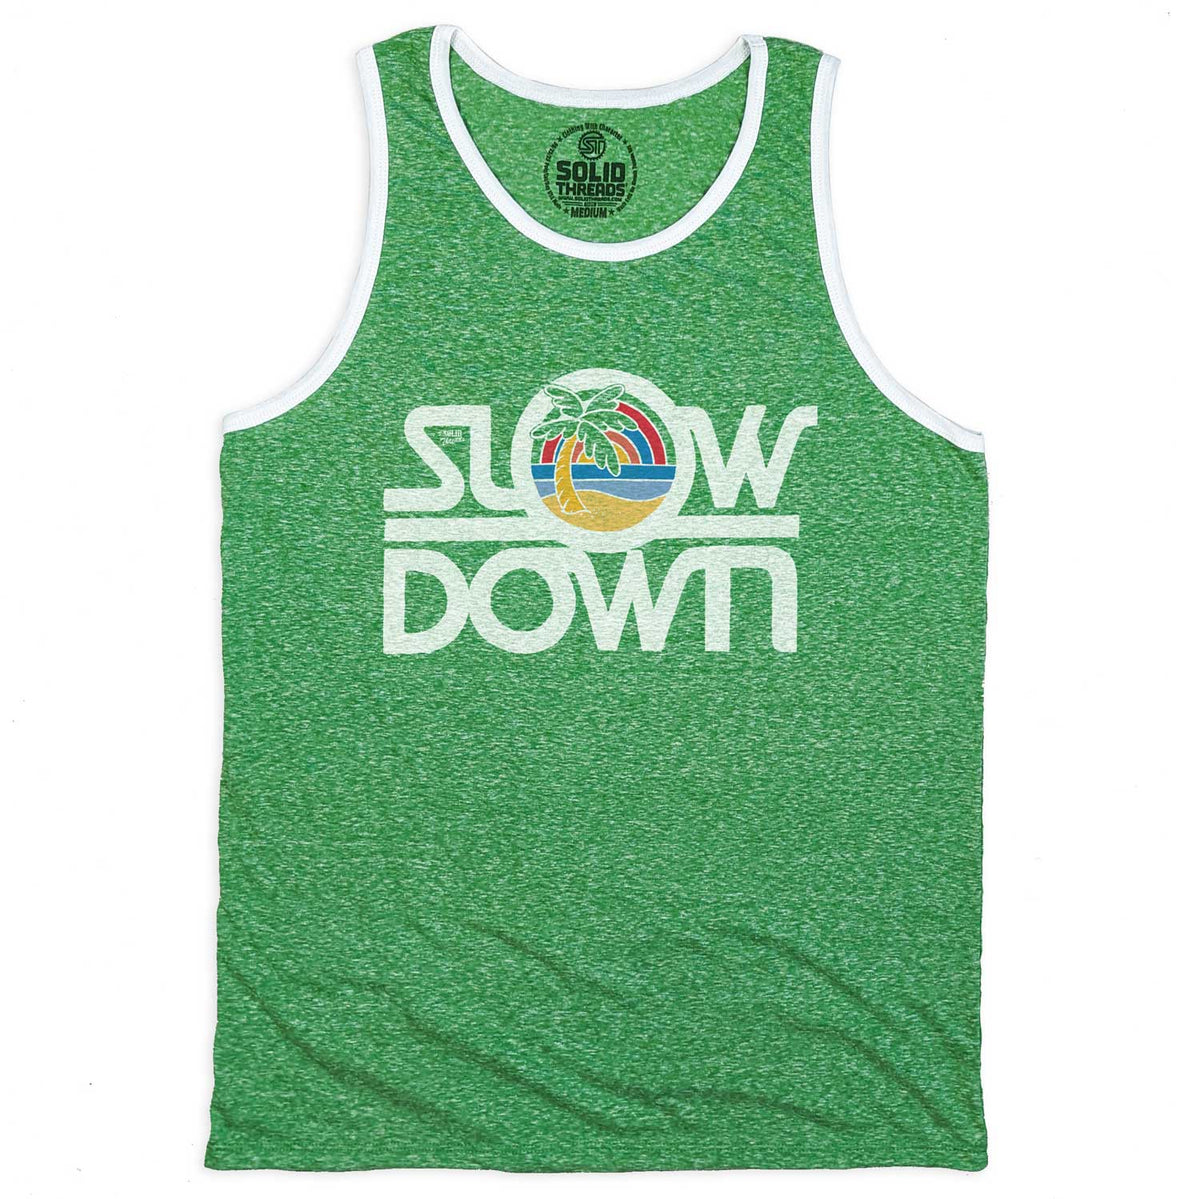 Men&#39;s Slow Down Vintage Graphic Tank Top | Retro Beach Vacation Sleeveless Shirt | Solid Threads